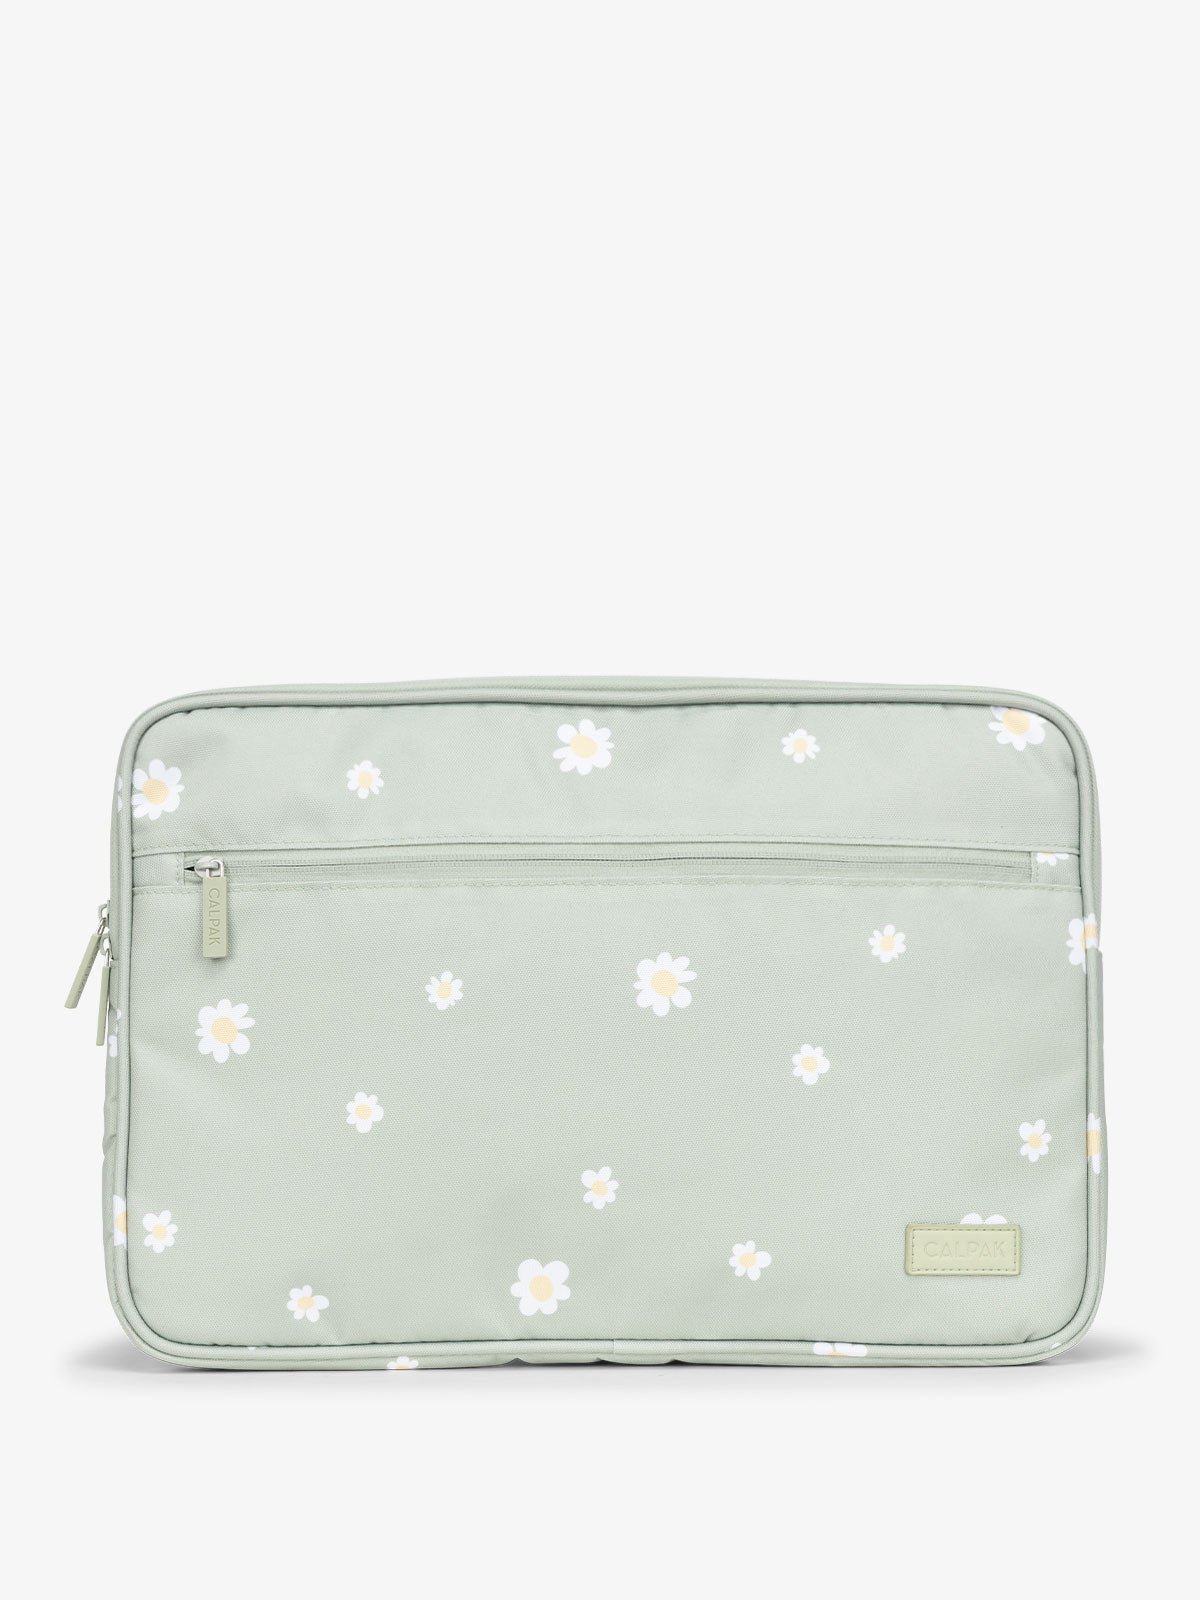 CALPAK 15-17 Inch Laptop protective case with front zippered pocket in green floral print